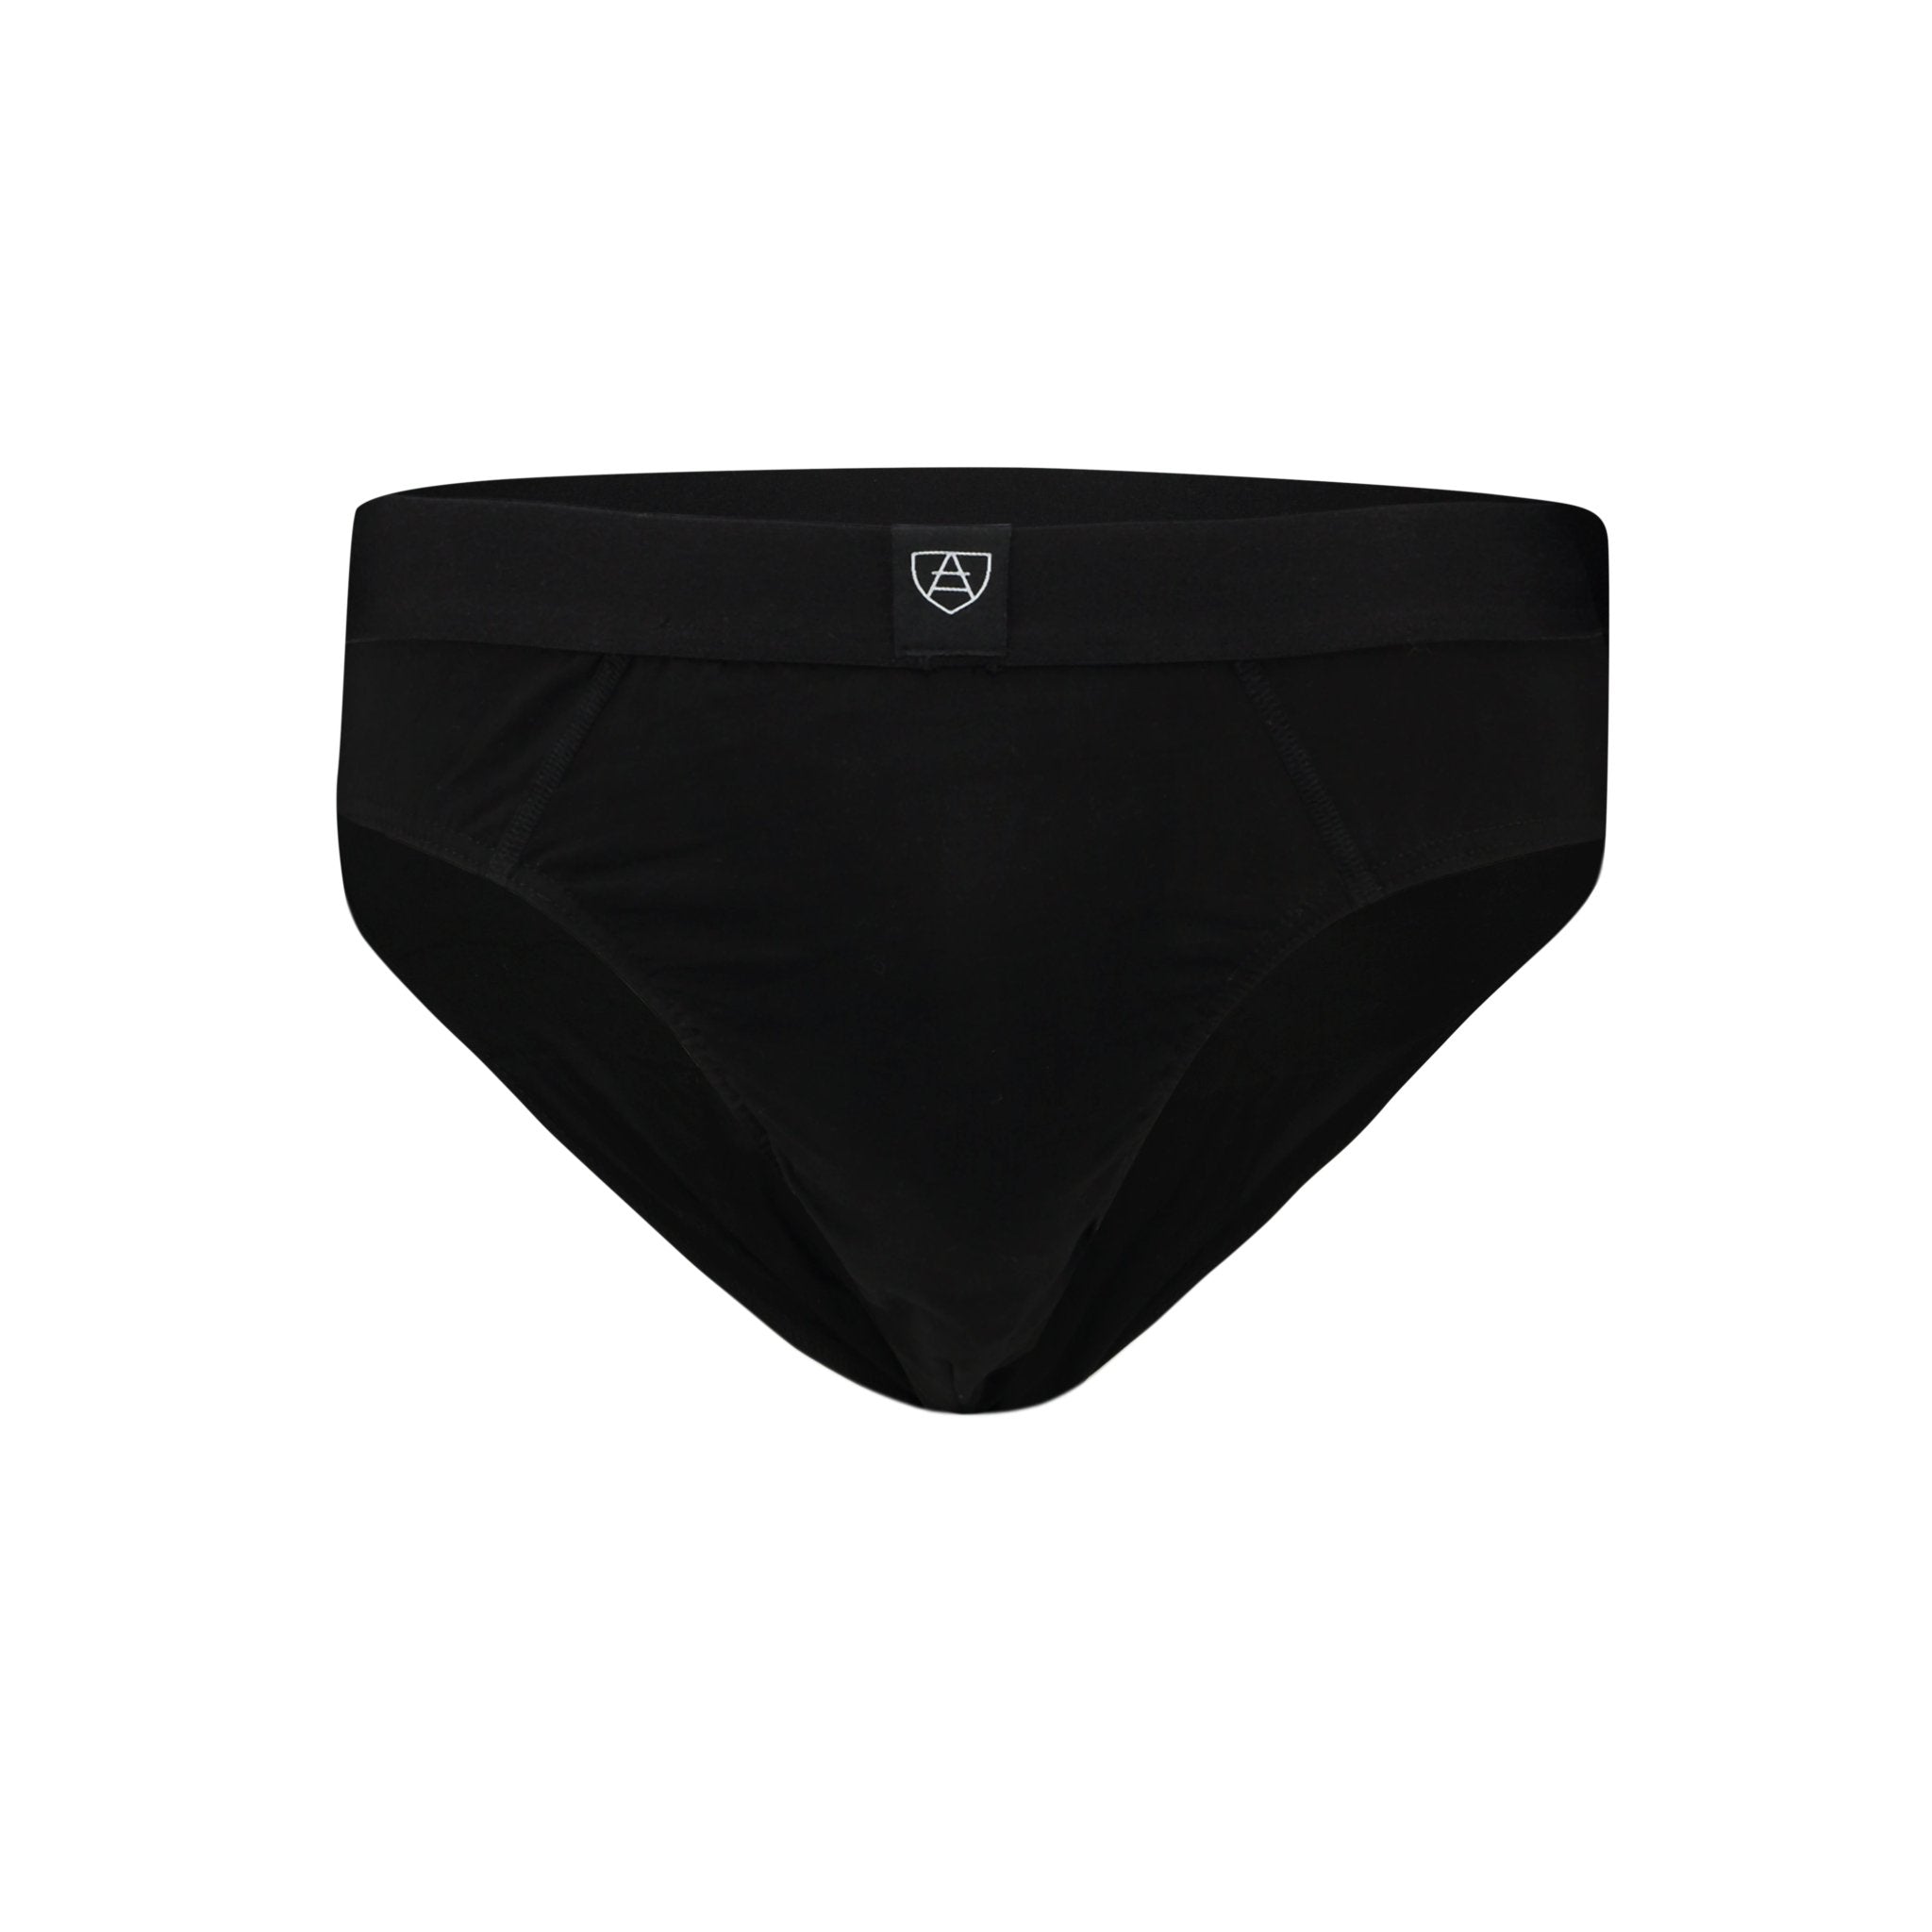 Black All-in-One Packing Boxers